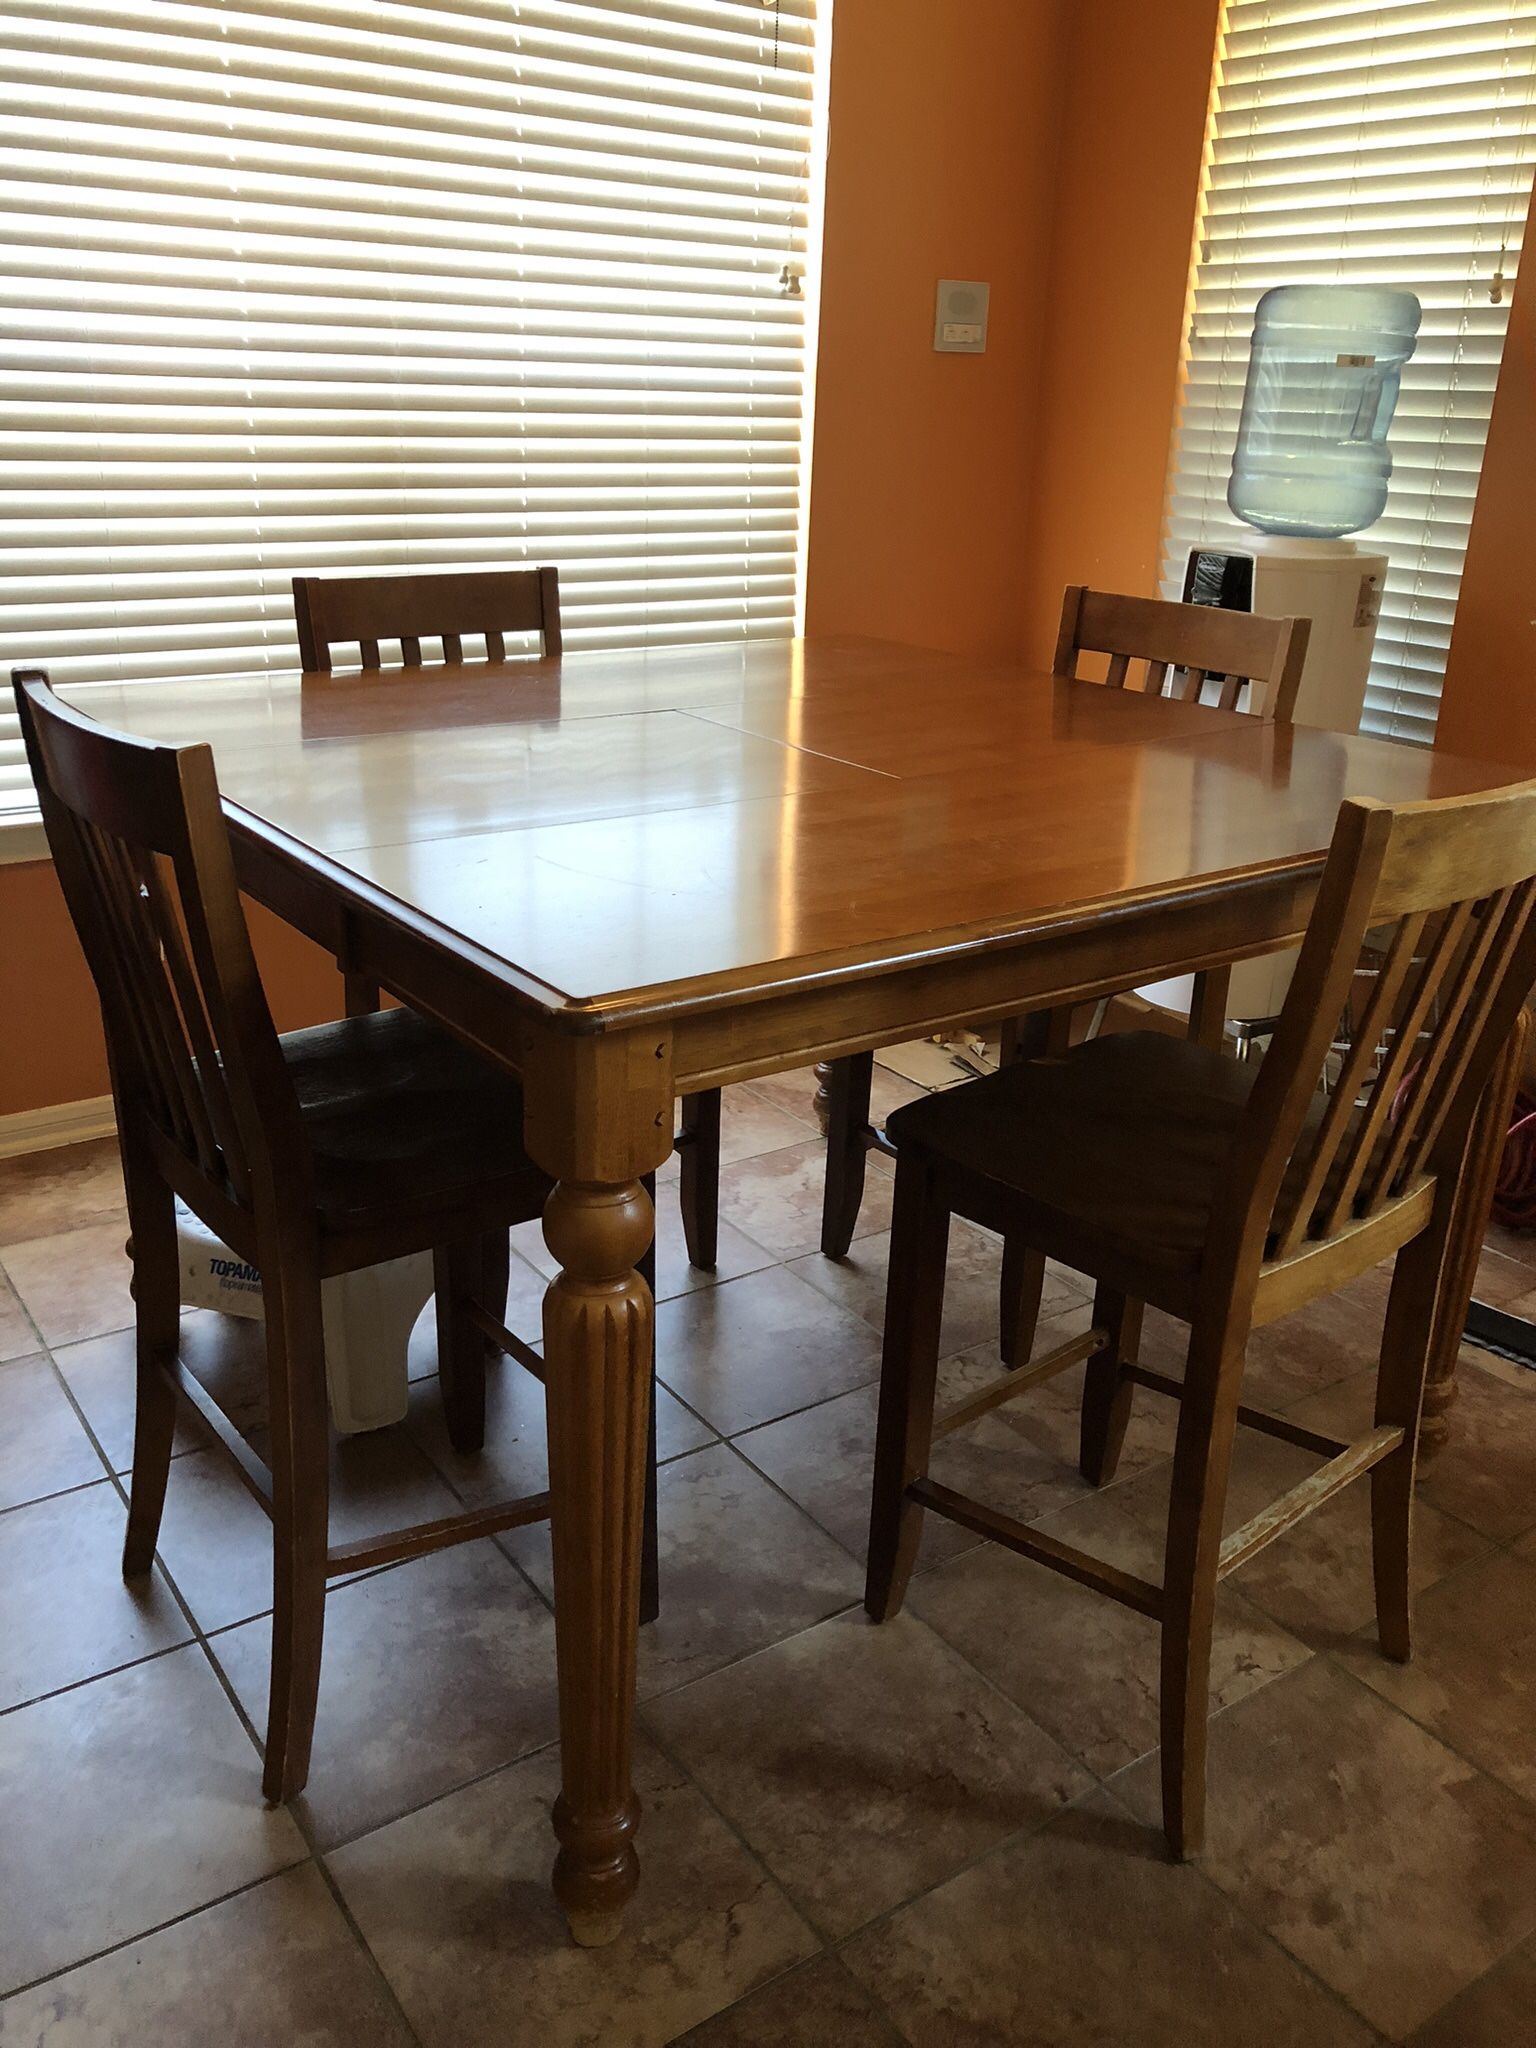 Solid Wood And Very Sturdy Tall Dinner Table With Four Chair